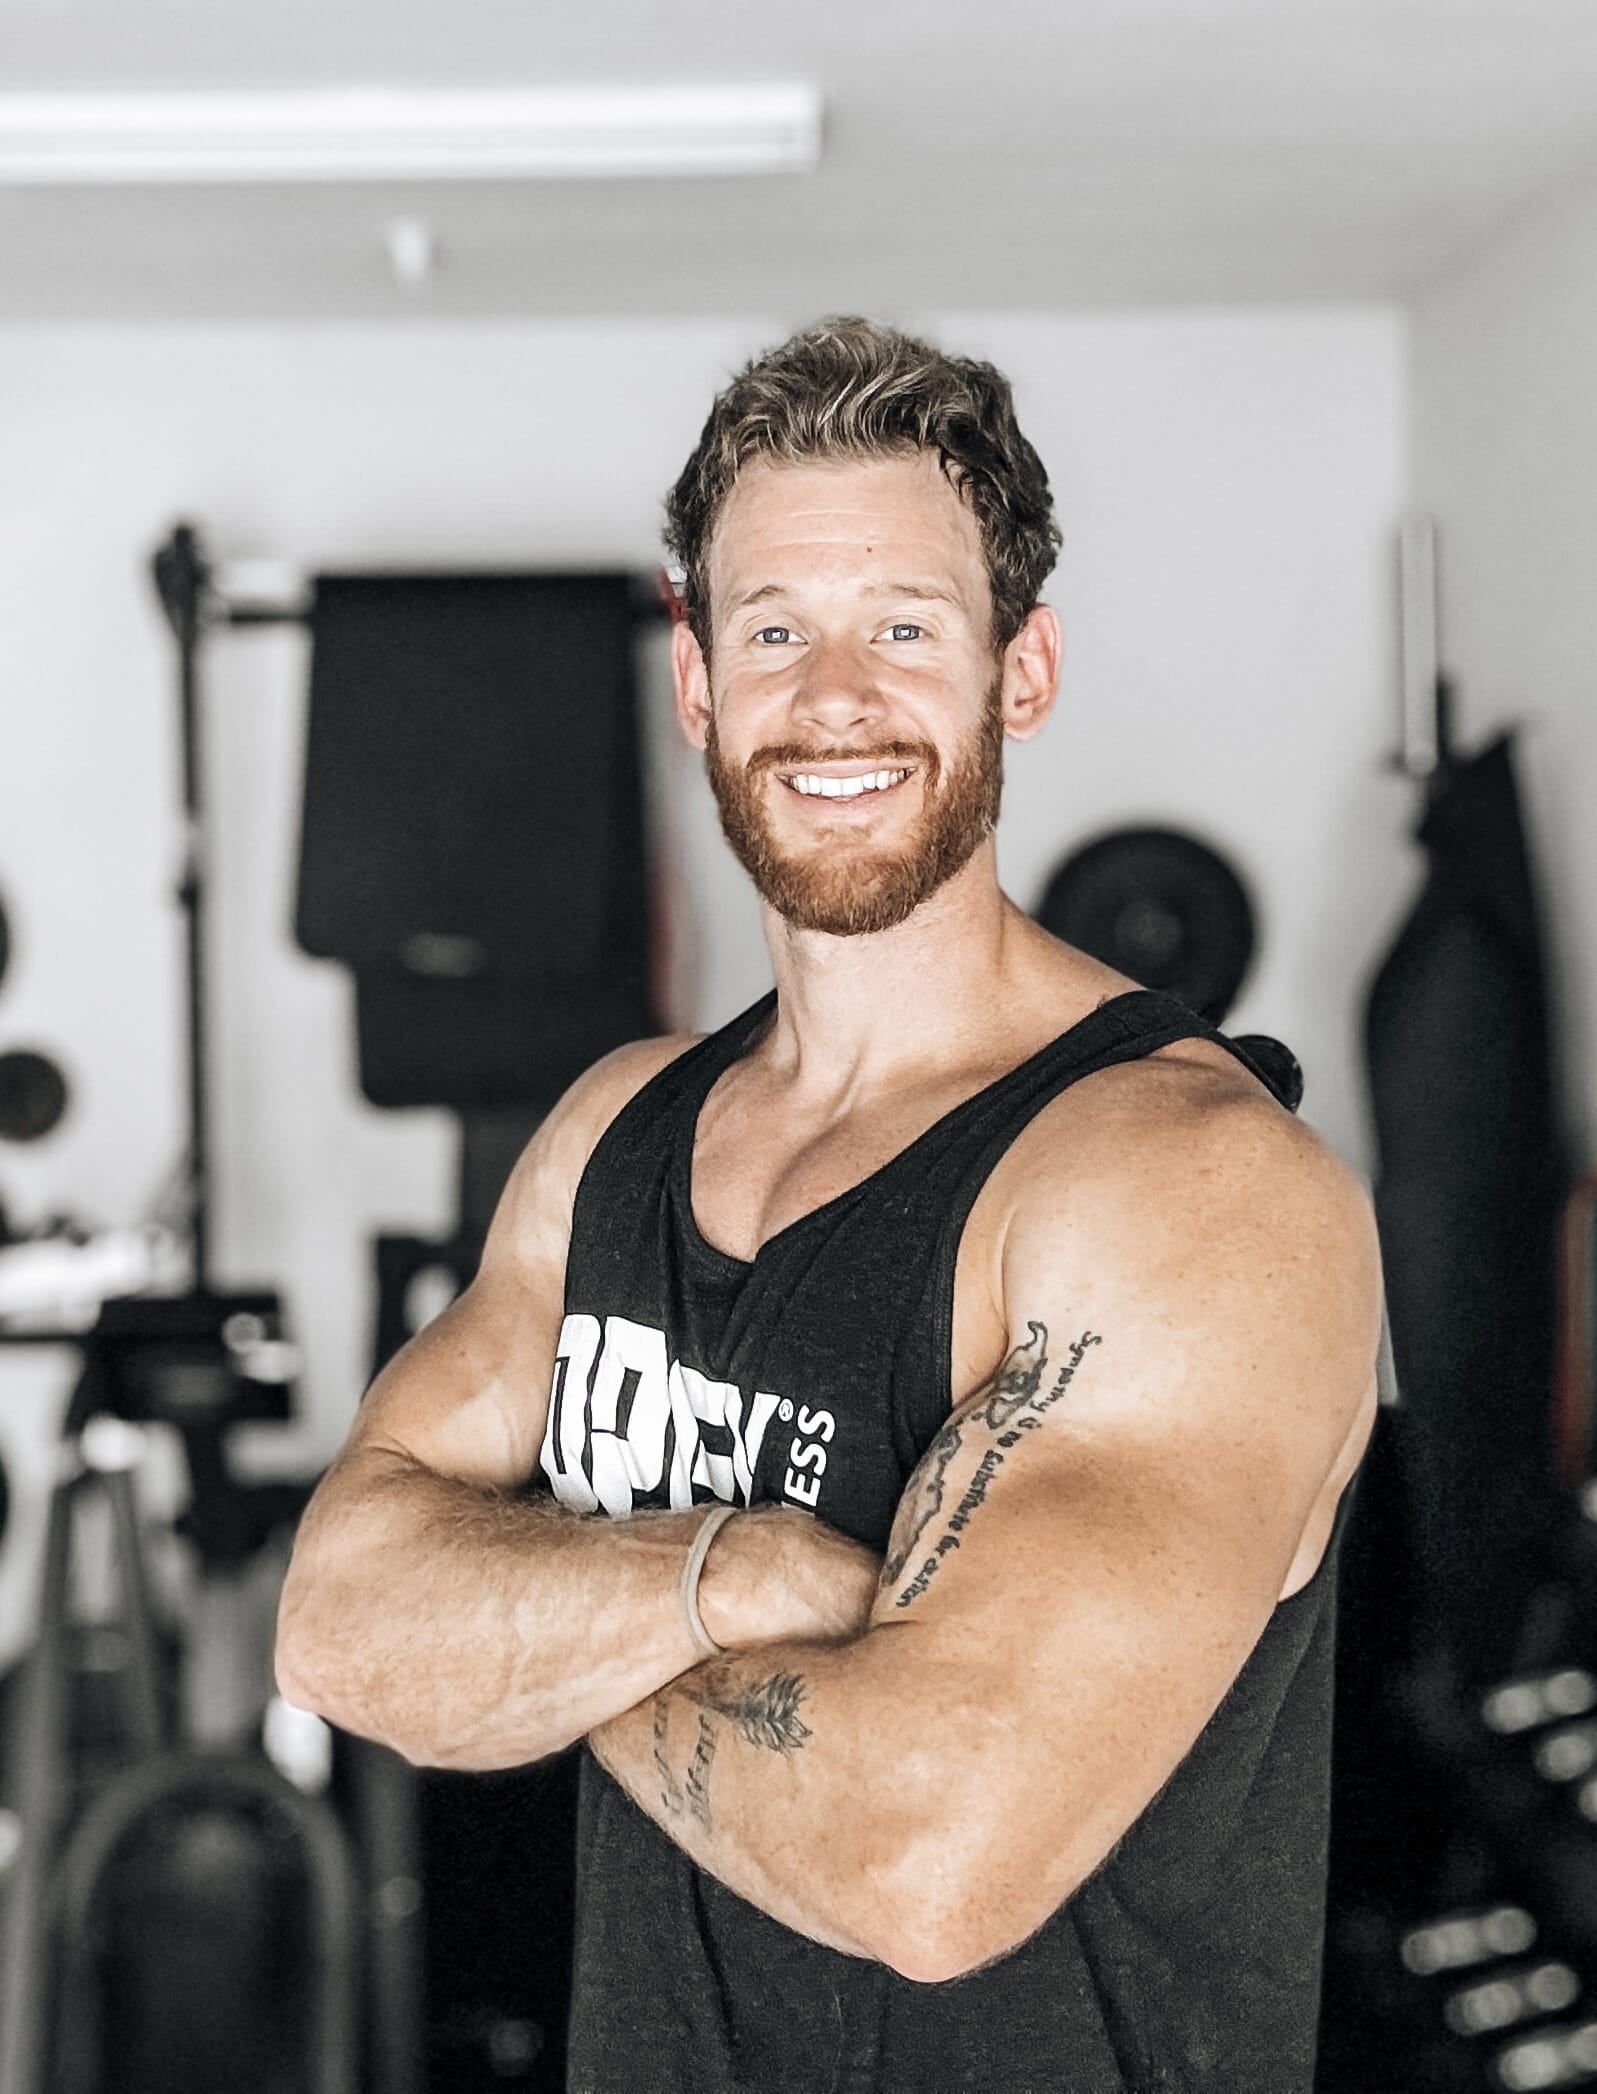 OPEX South Lake | Benjamin Crawford / Personalized Coach / Personal Trainer